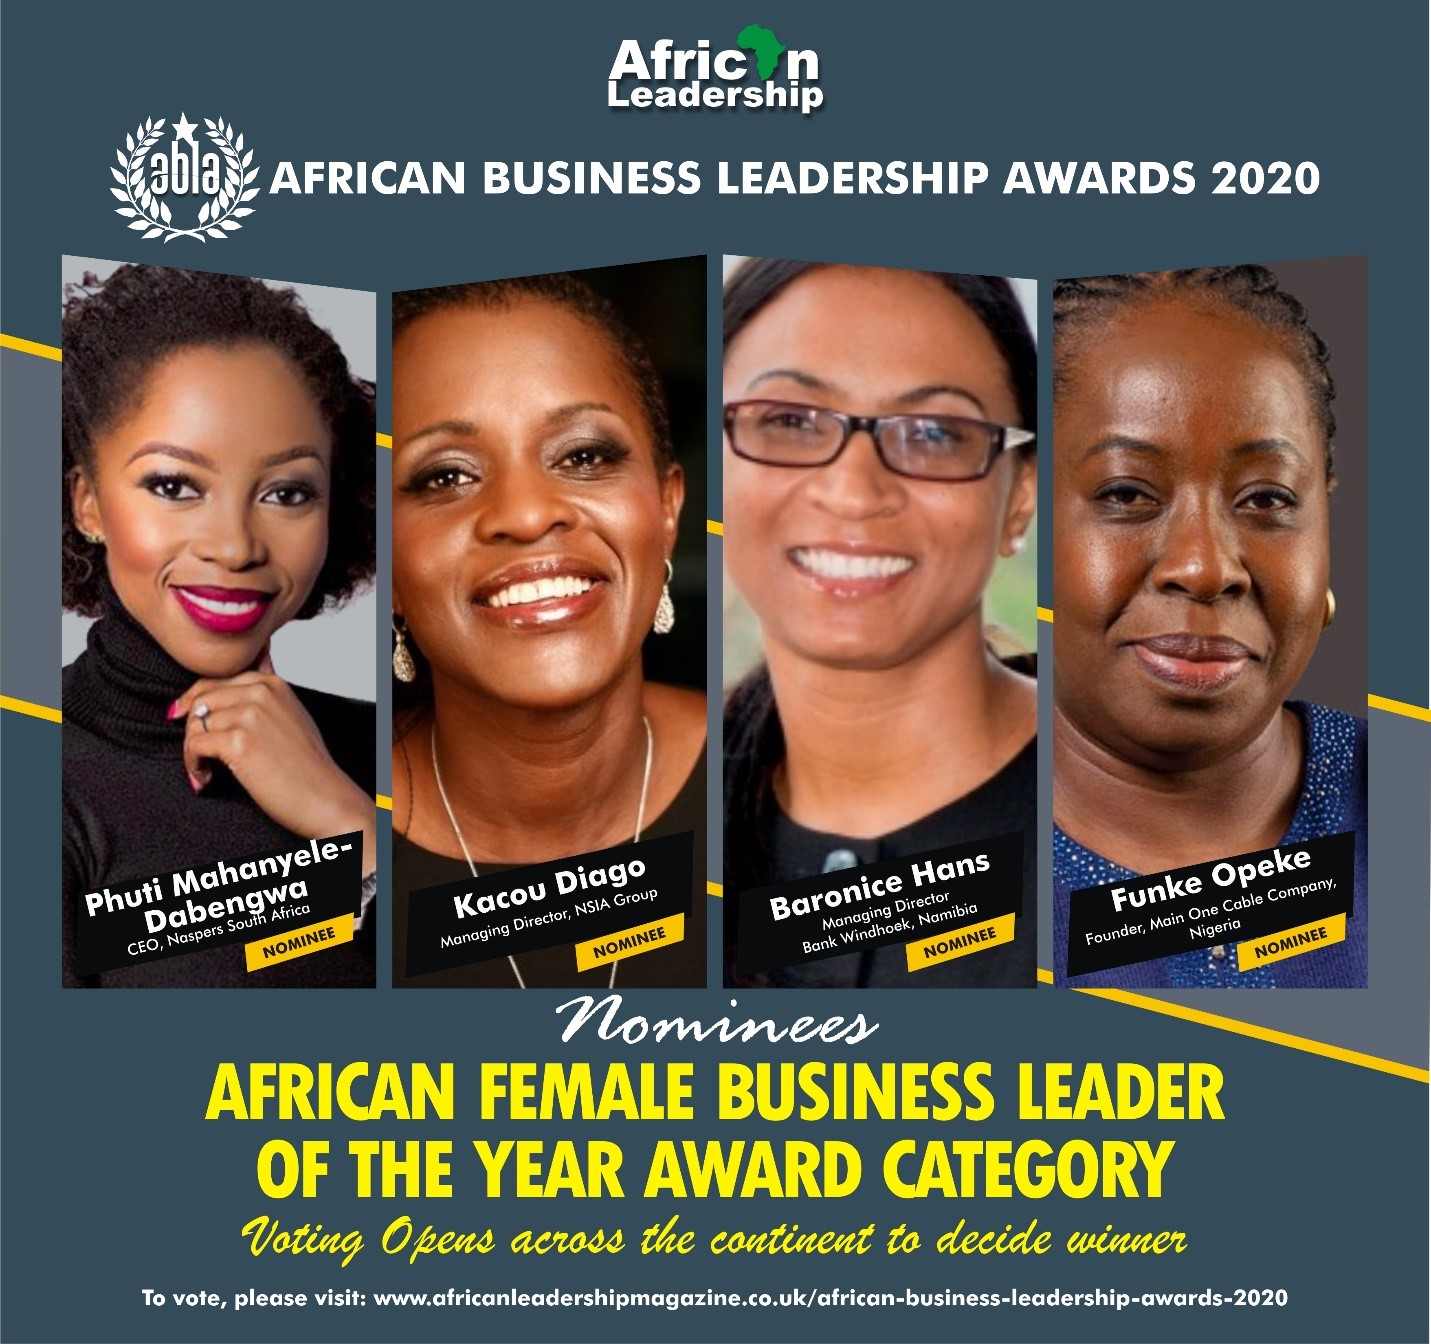 Meet the 4 contenders for the African Female Business Leaders of the Year 2020 Award